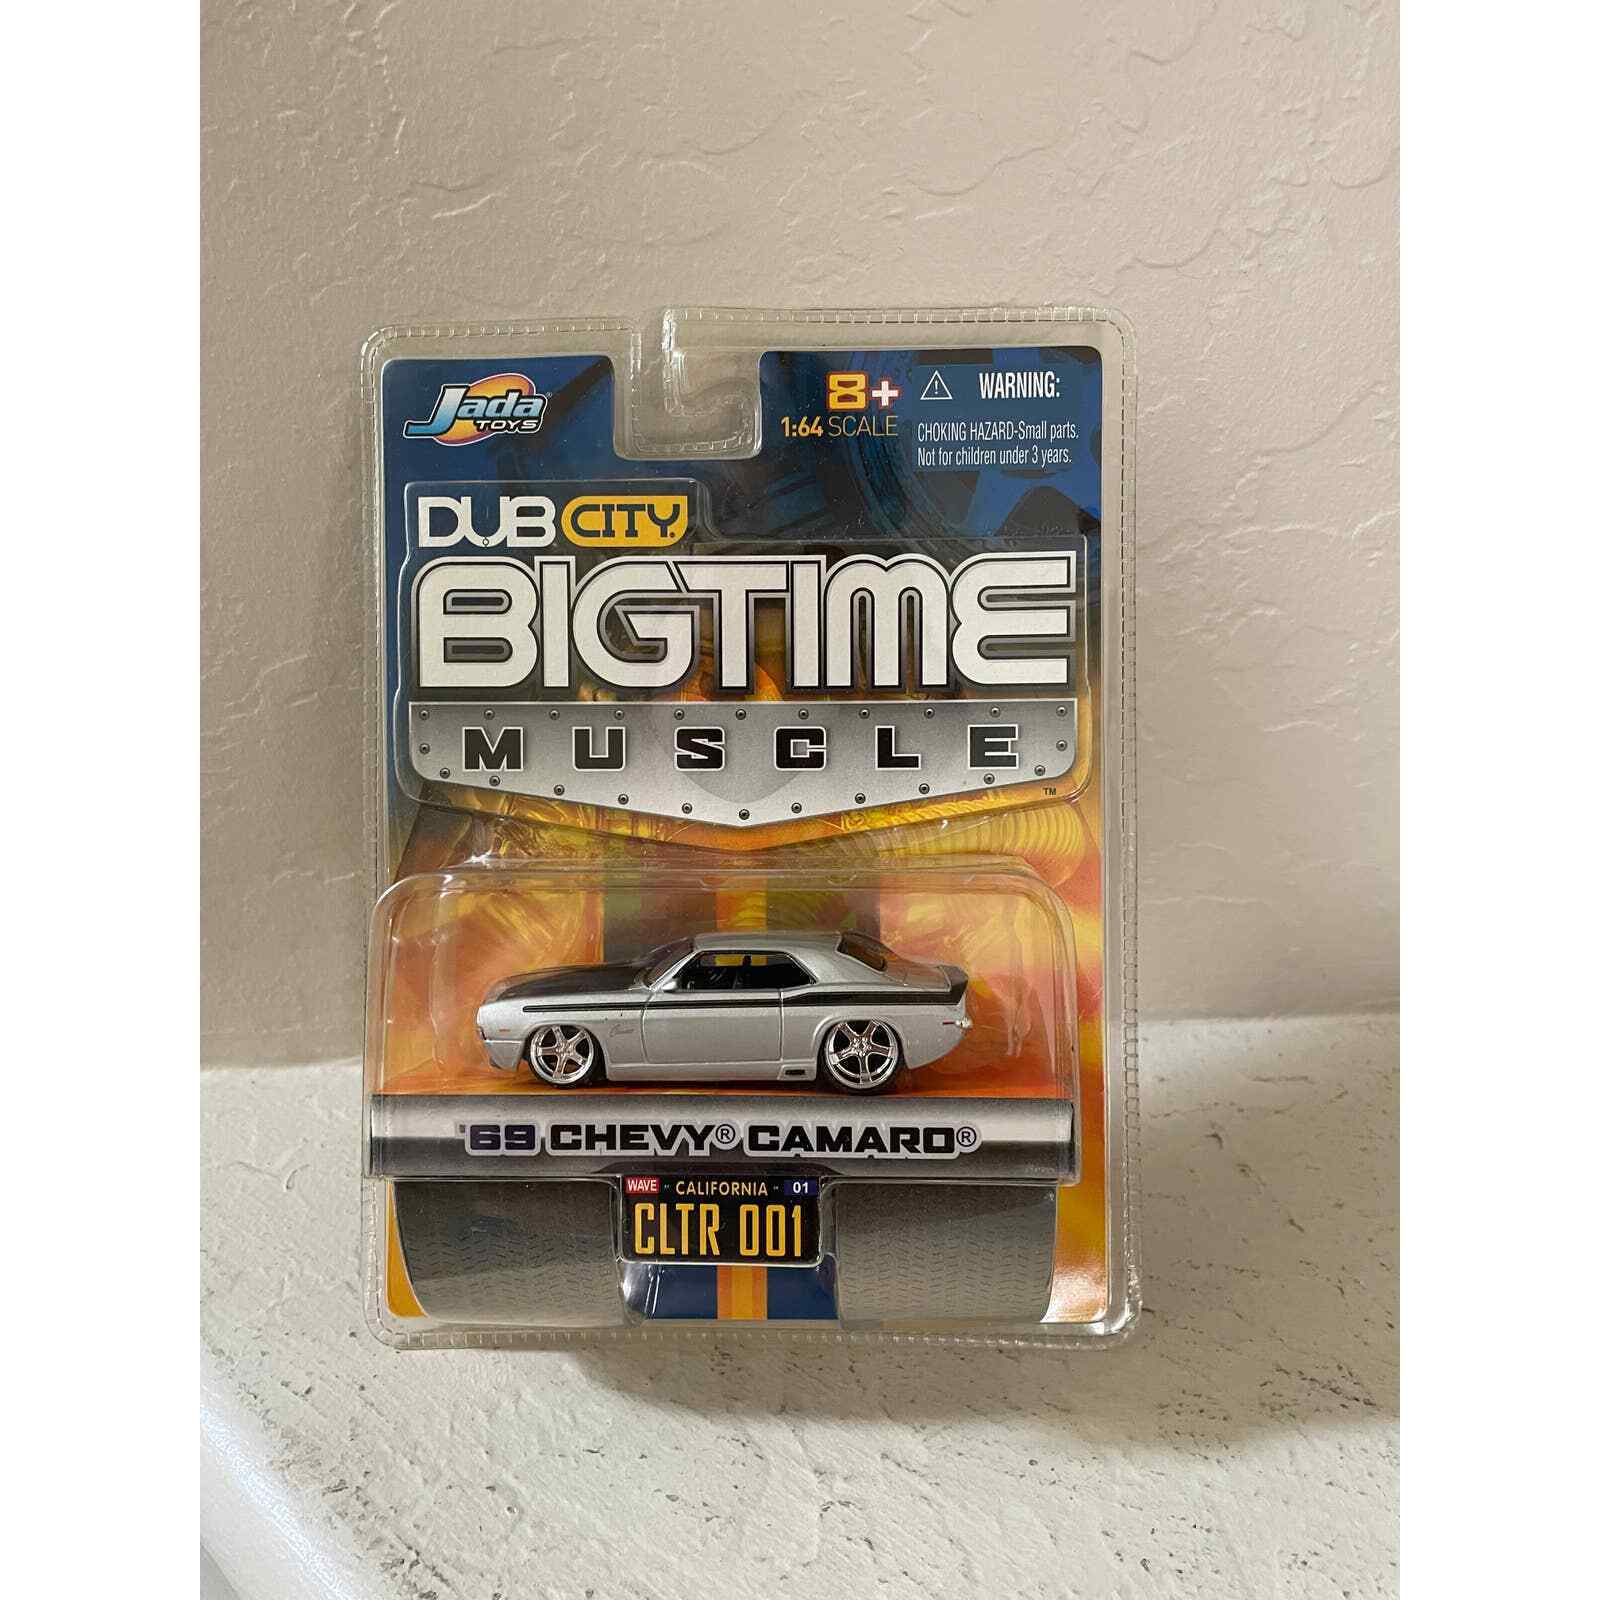 Jada Toys Dub City Big Time Muscle '69 Chevy Camaro CLTR 001 MT32